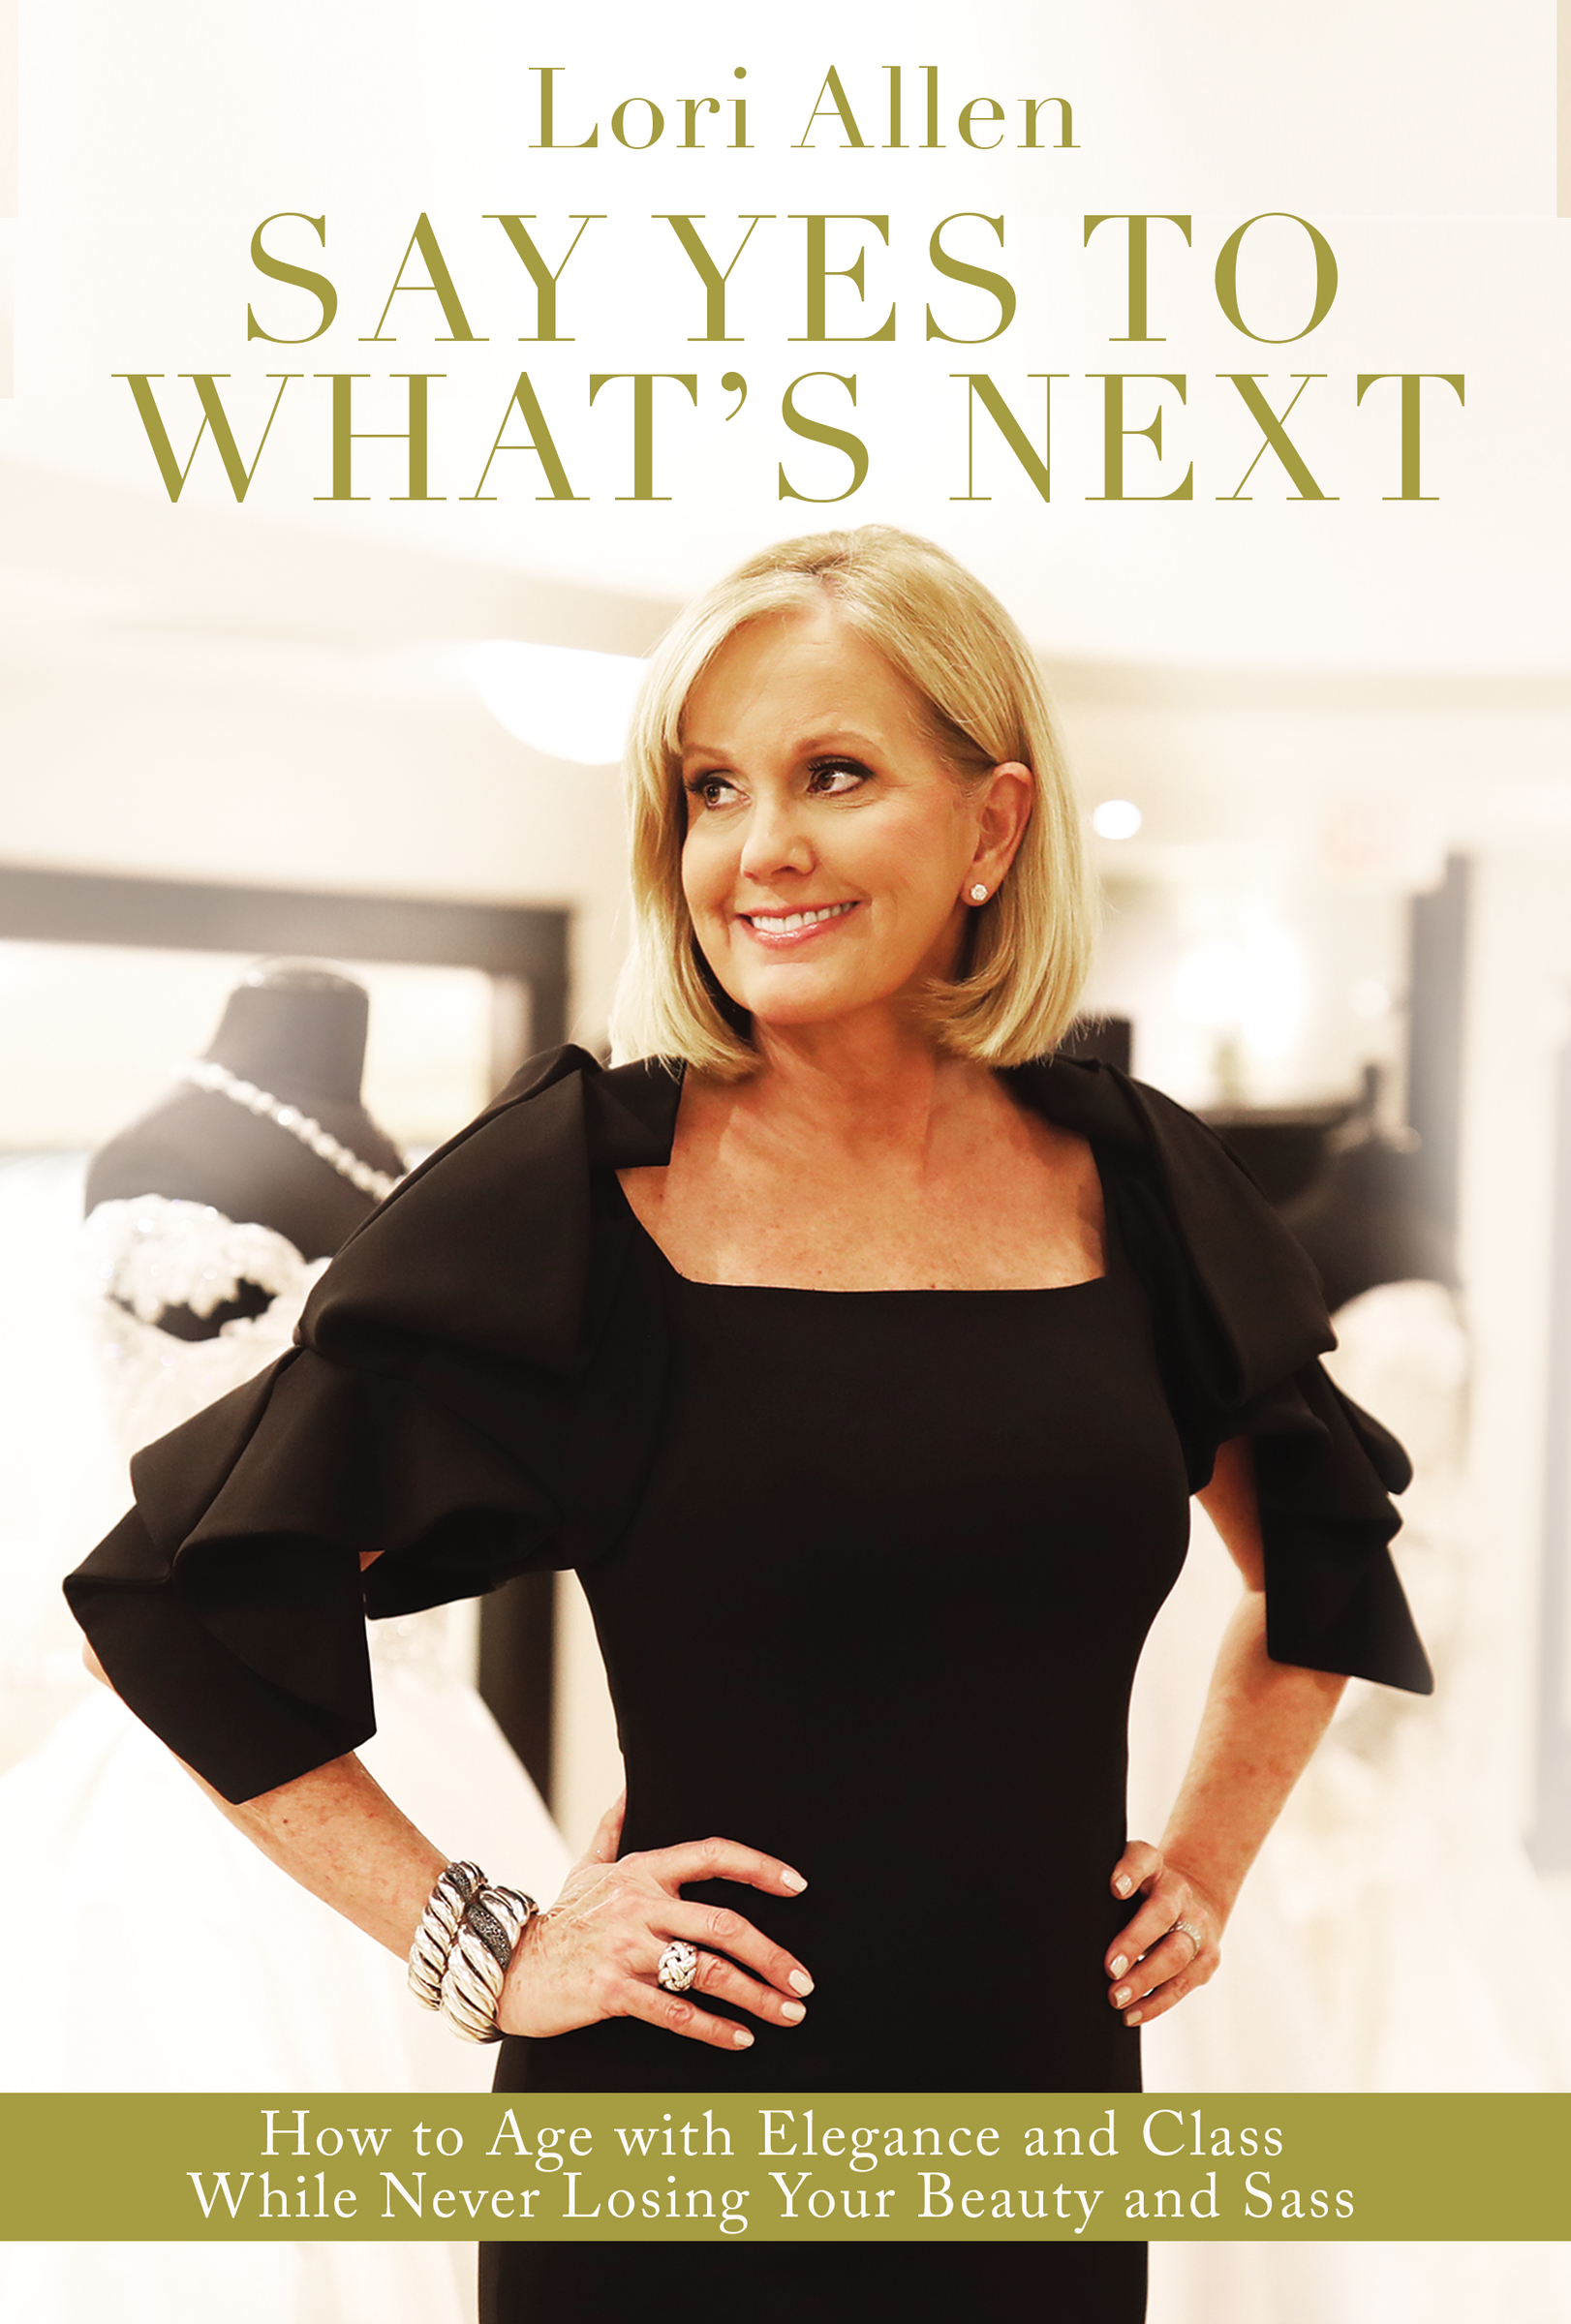 Say yes to what's next how to age with elegance and class while never losing your beauty and sass! cover image